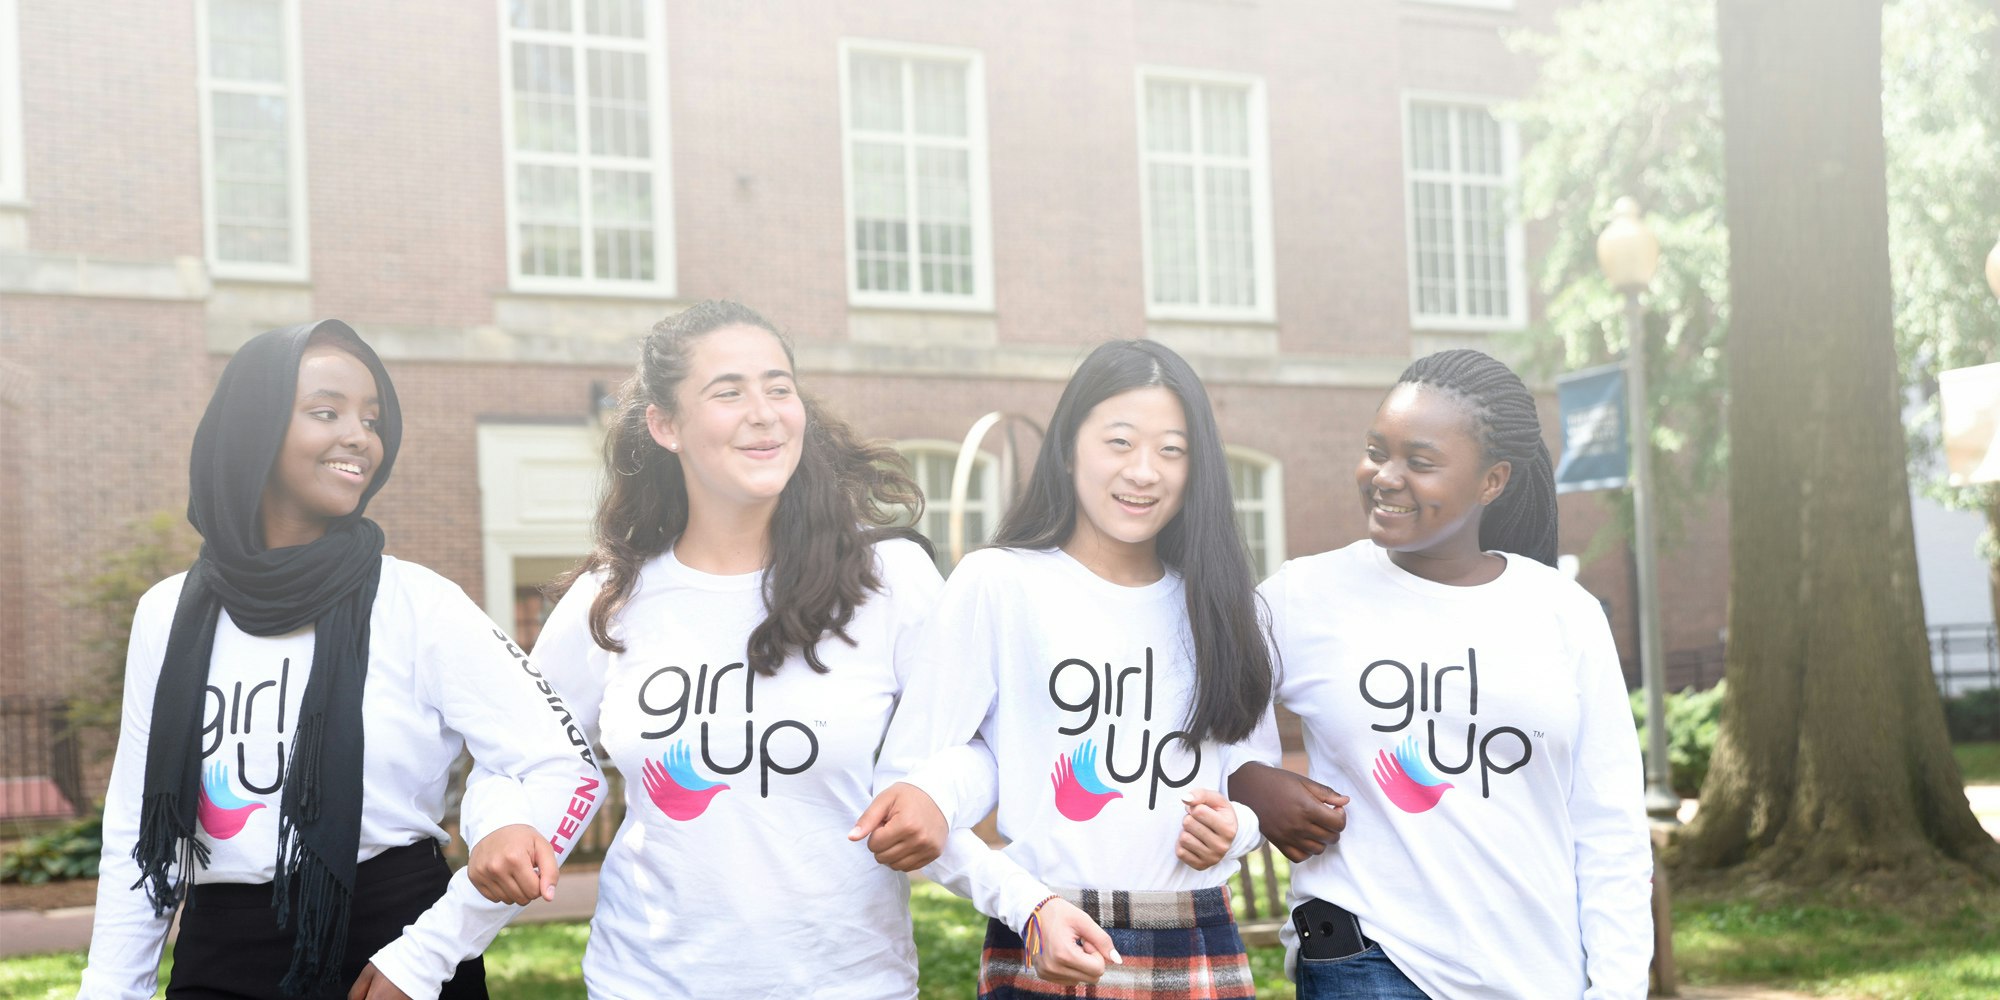 4 different ethnic Girl Up girls with the girl up shirt on (group picture)